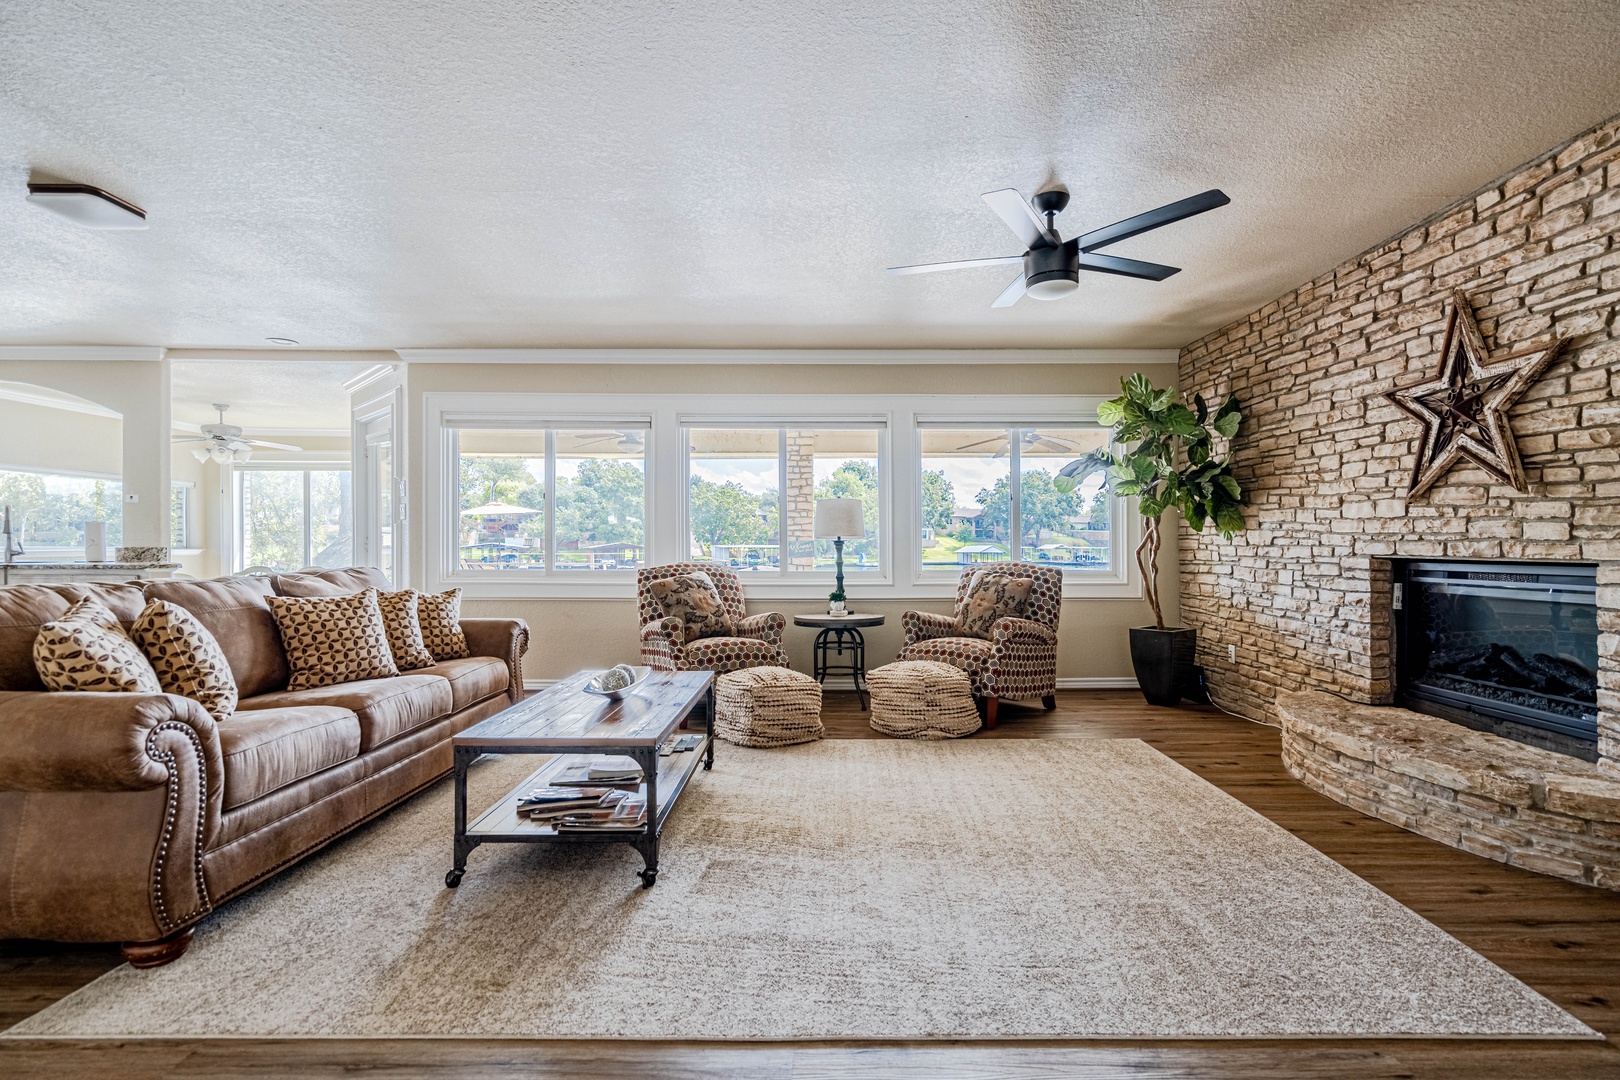 Living room features natural lighting throughout